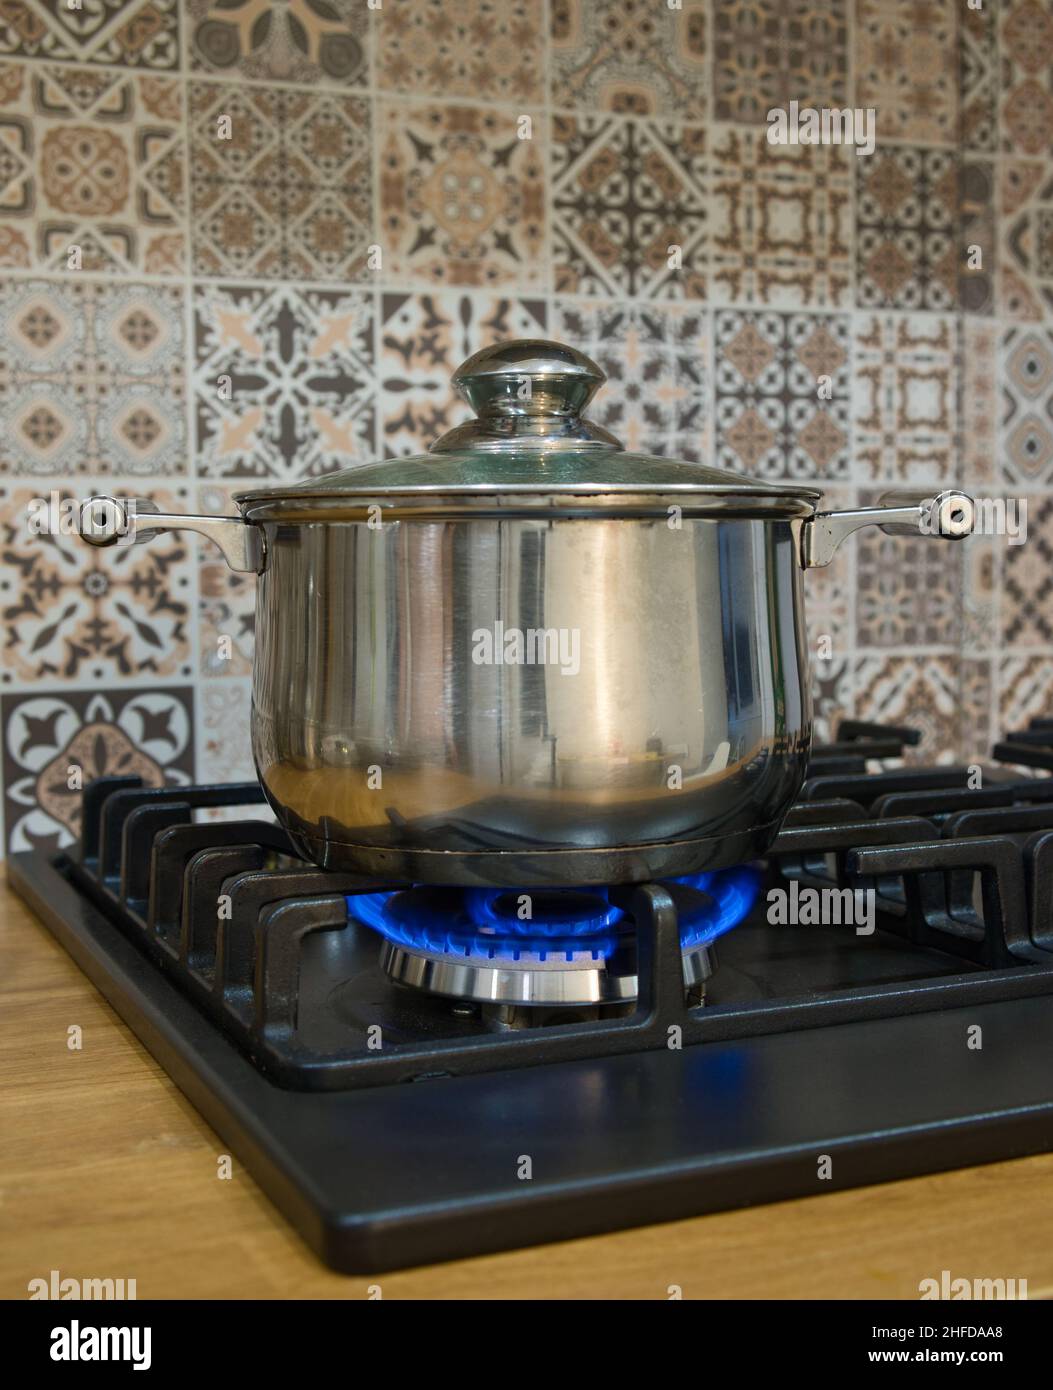 https://c8.alamy.com/comp/2HFDAA8/cooking-on-a-gas-stove-the-pot-on-gas-burner-home-cooking-concept-2HFDAA8.jpg